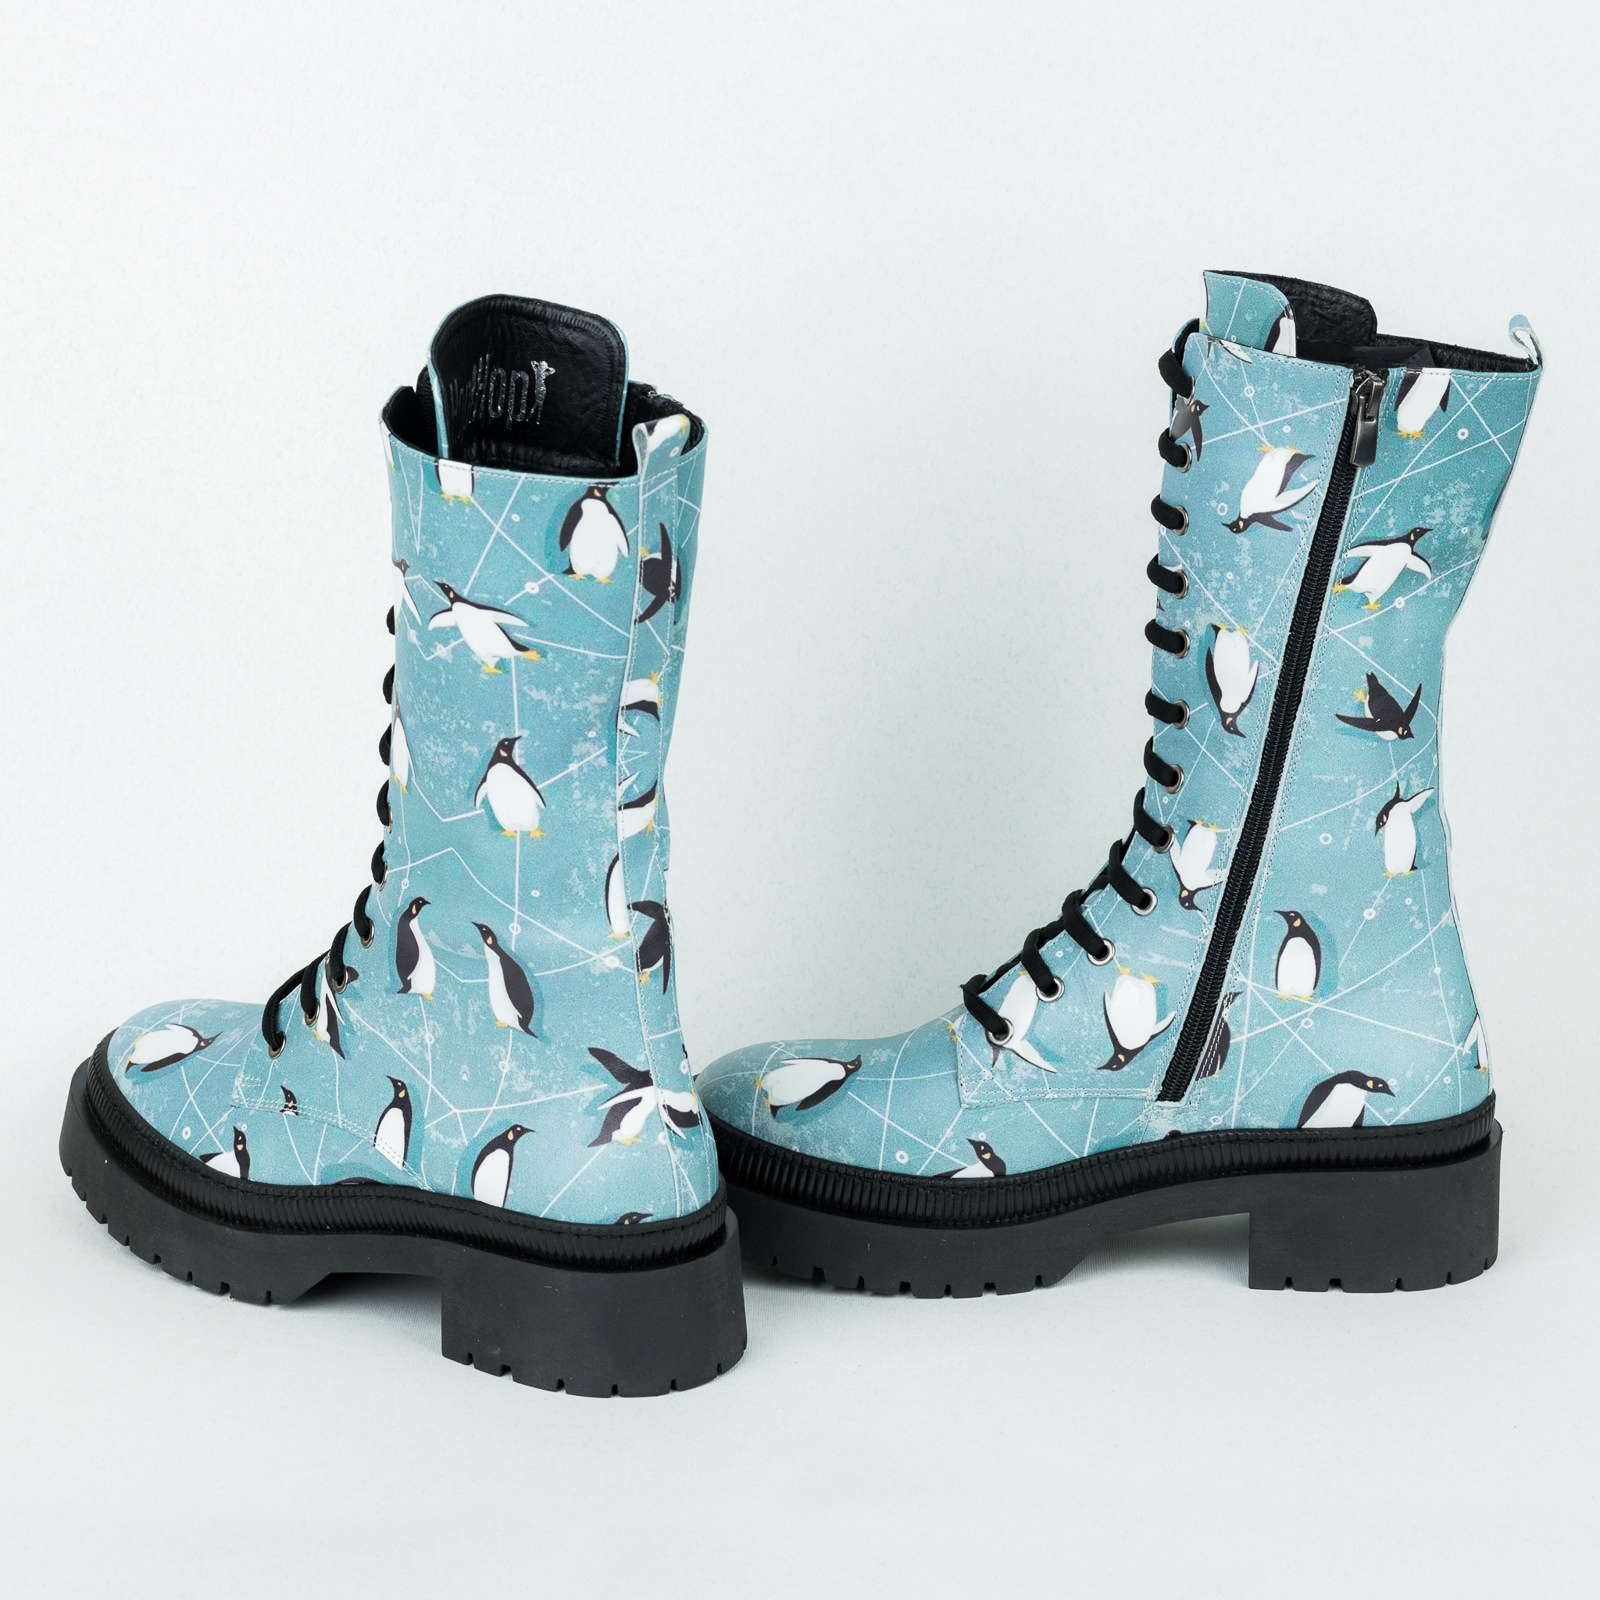 Leather boots B648 - LIGHT BLUE